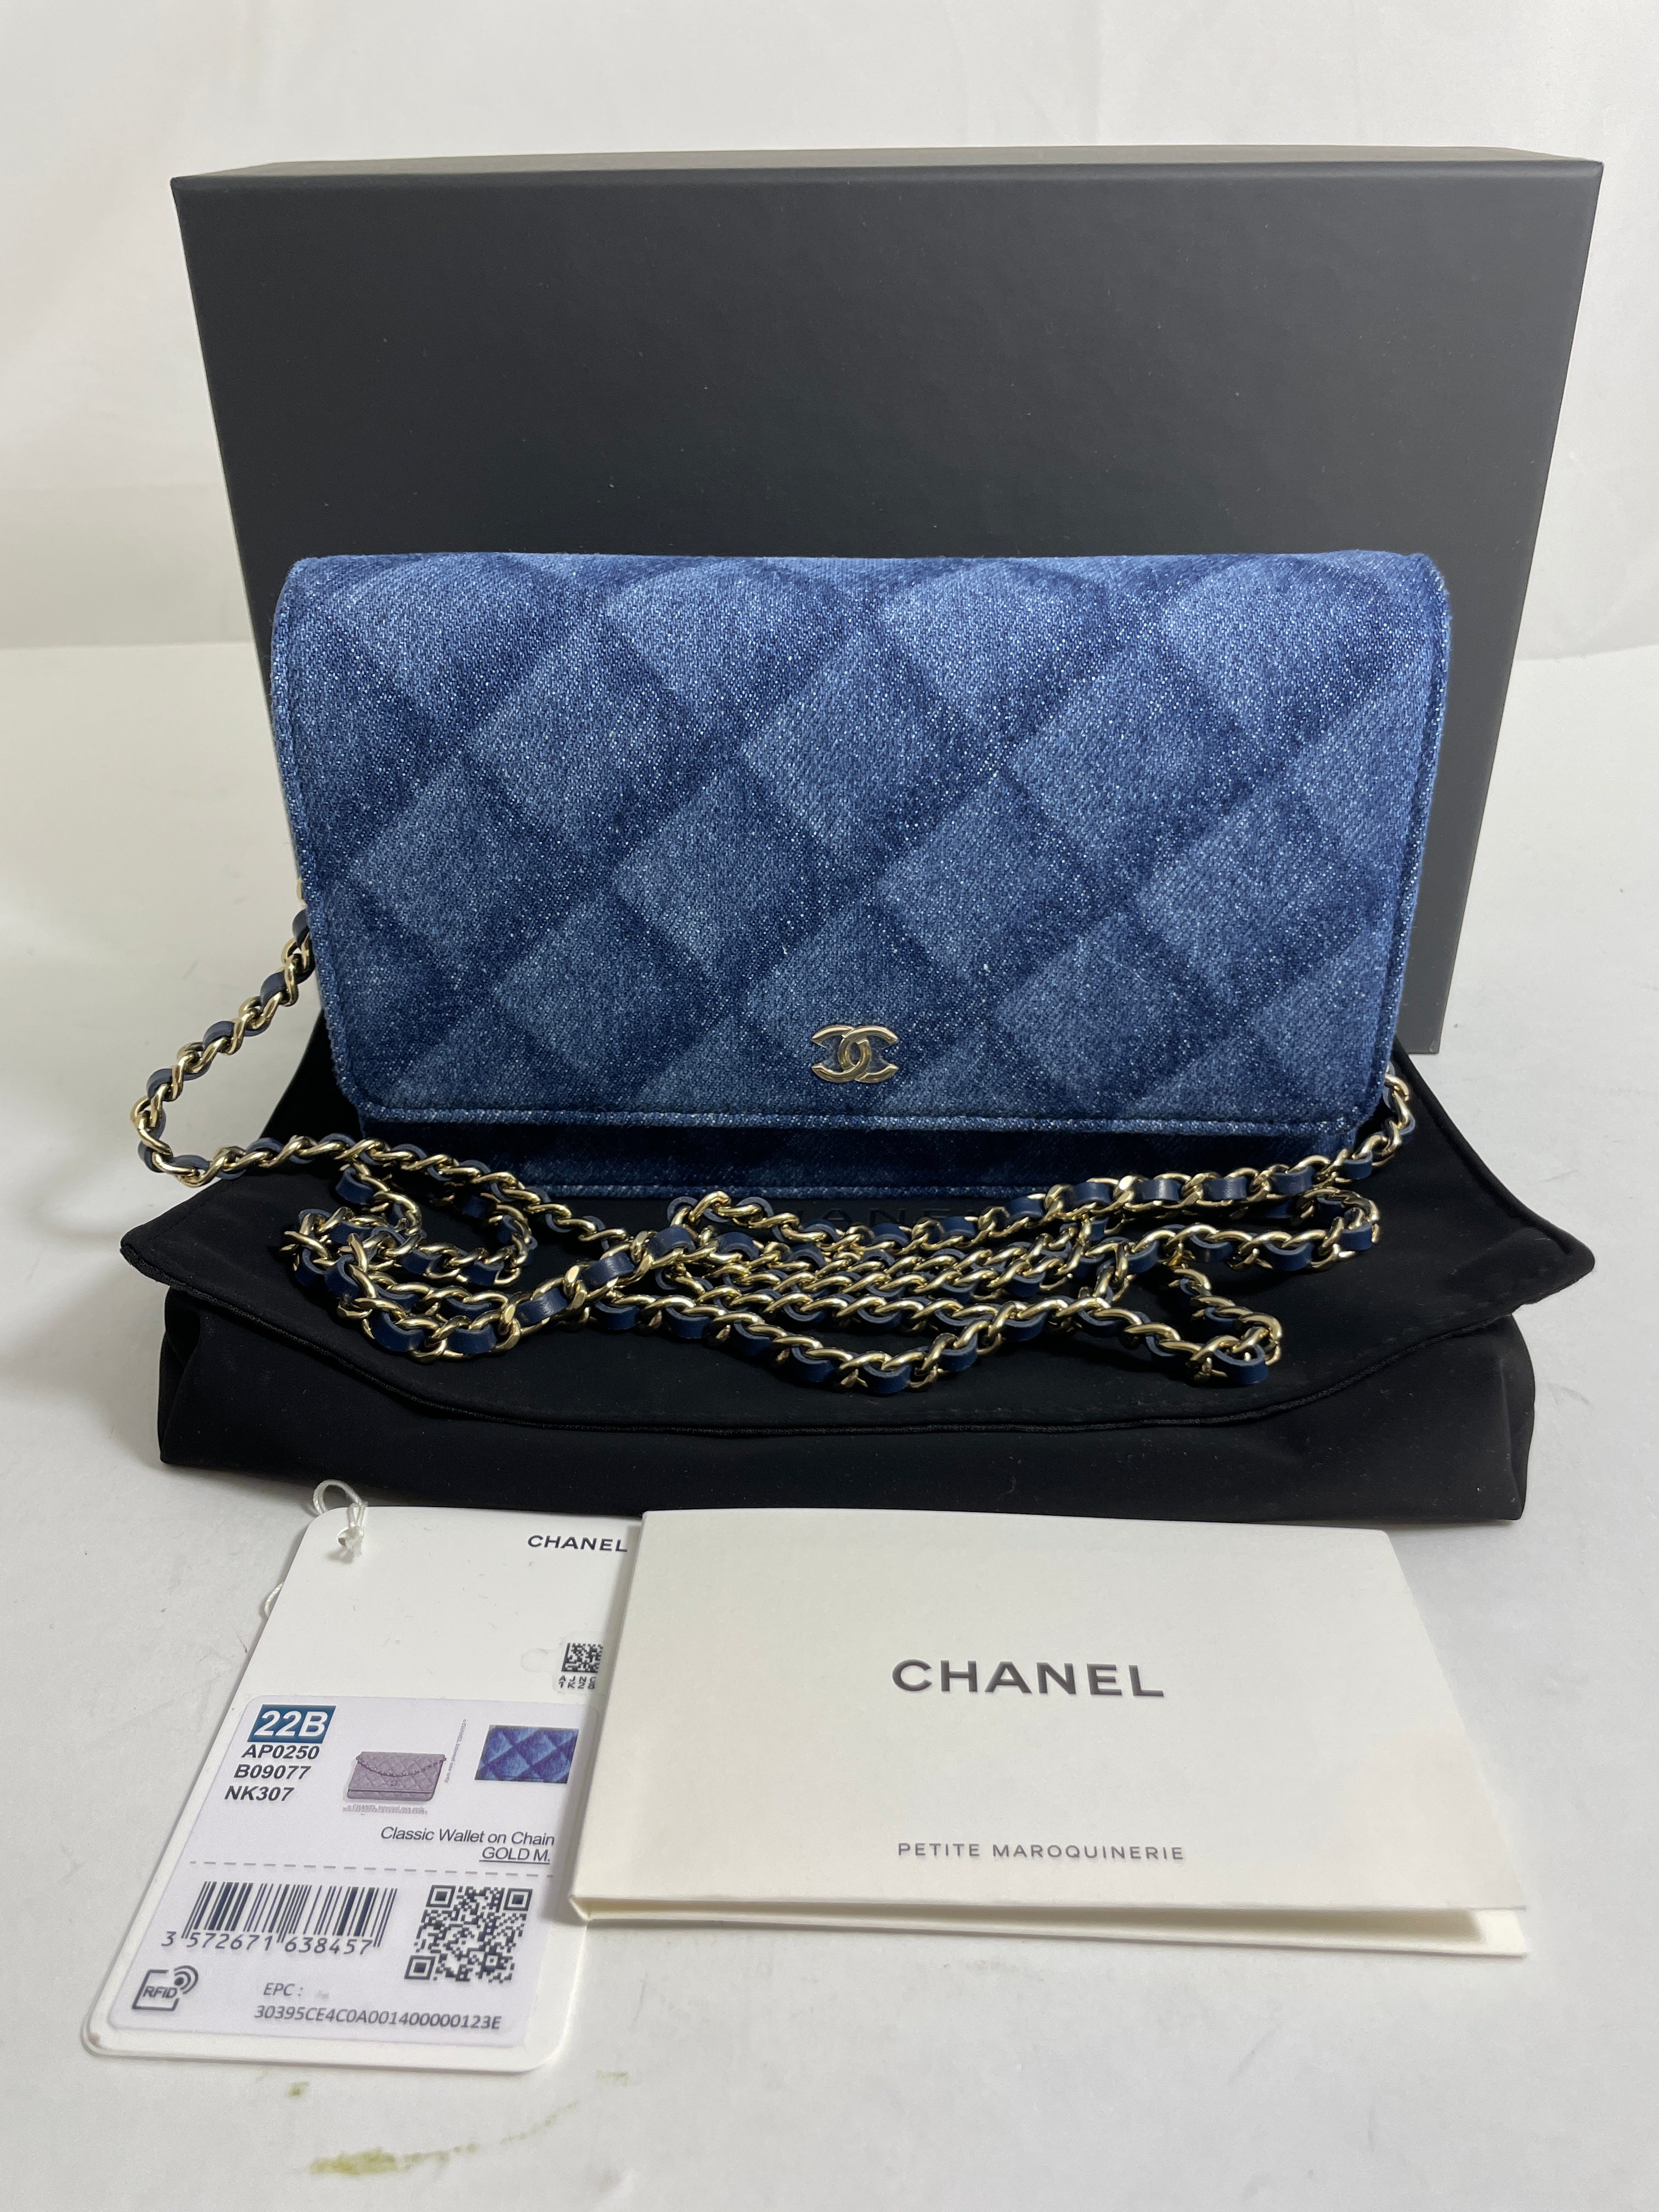 CHANEL Denim Jungle Jeans Wallet On Chain - The Purse Ladies